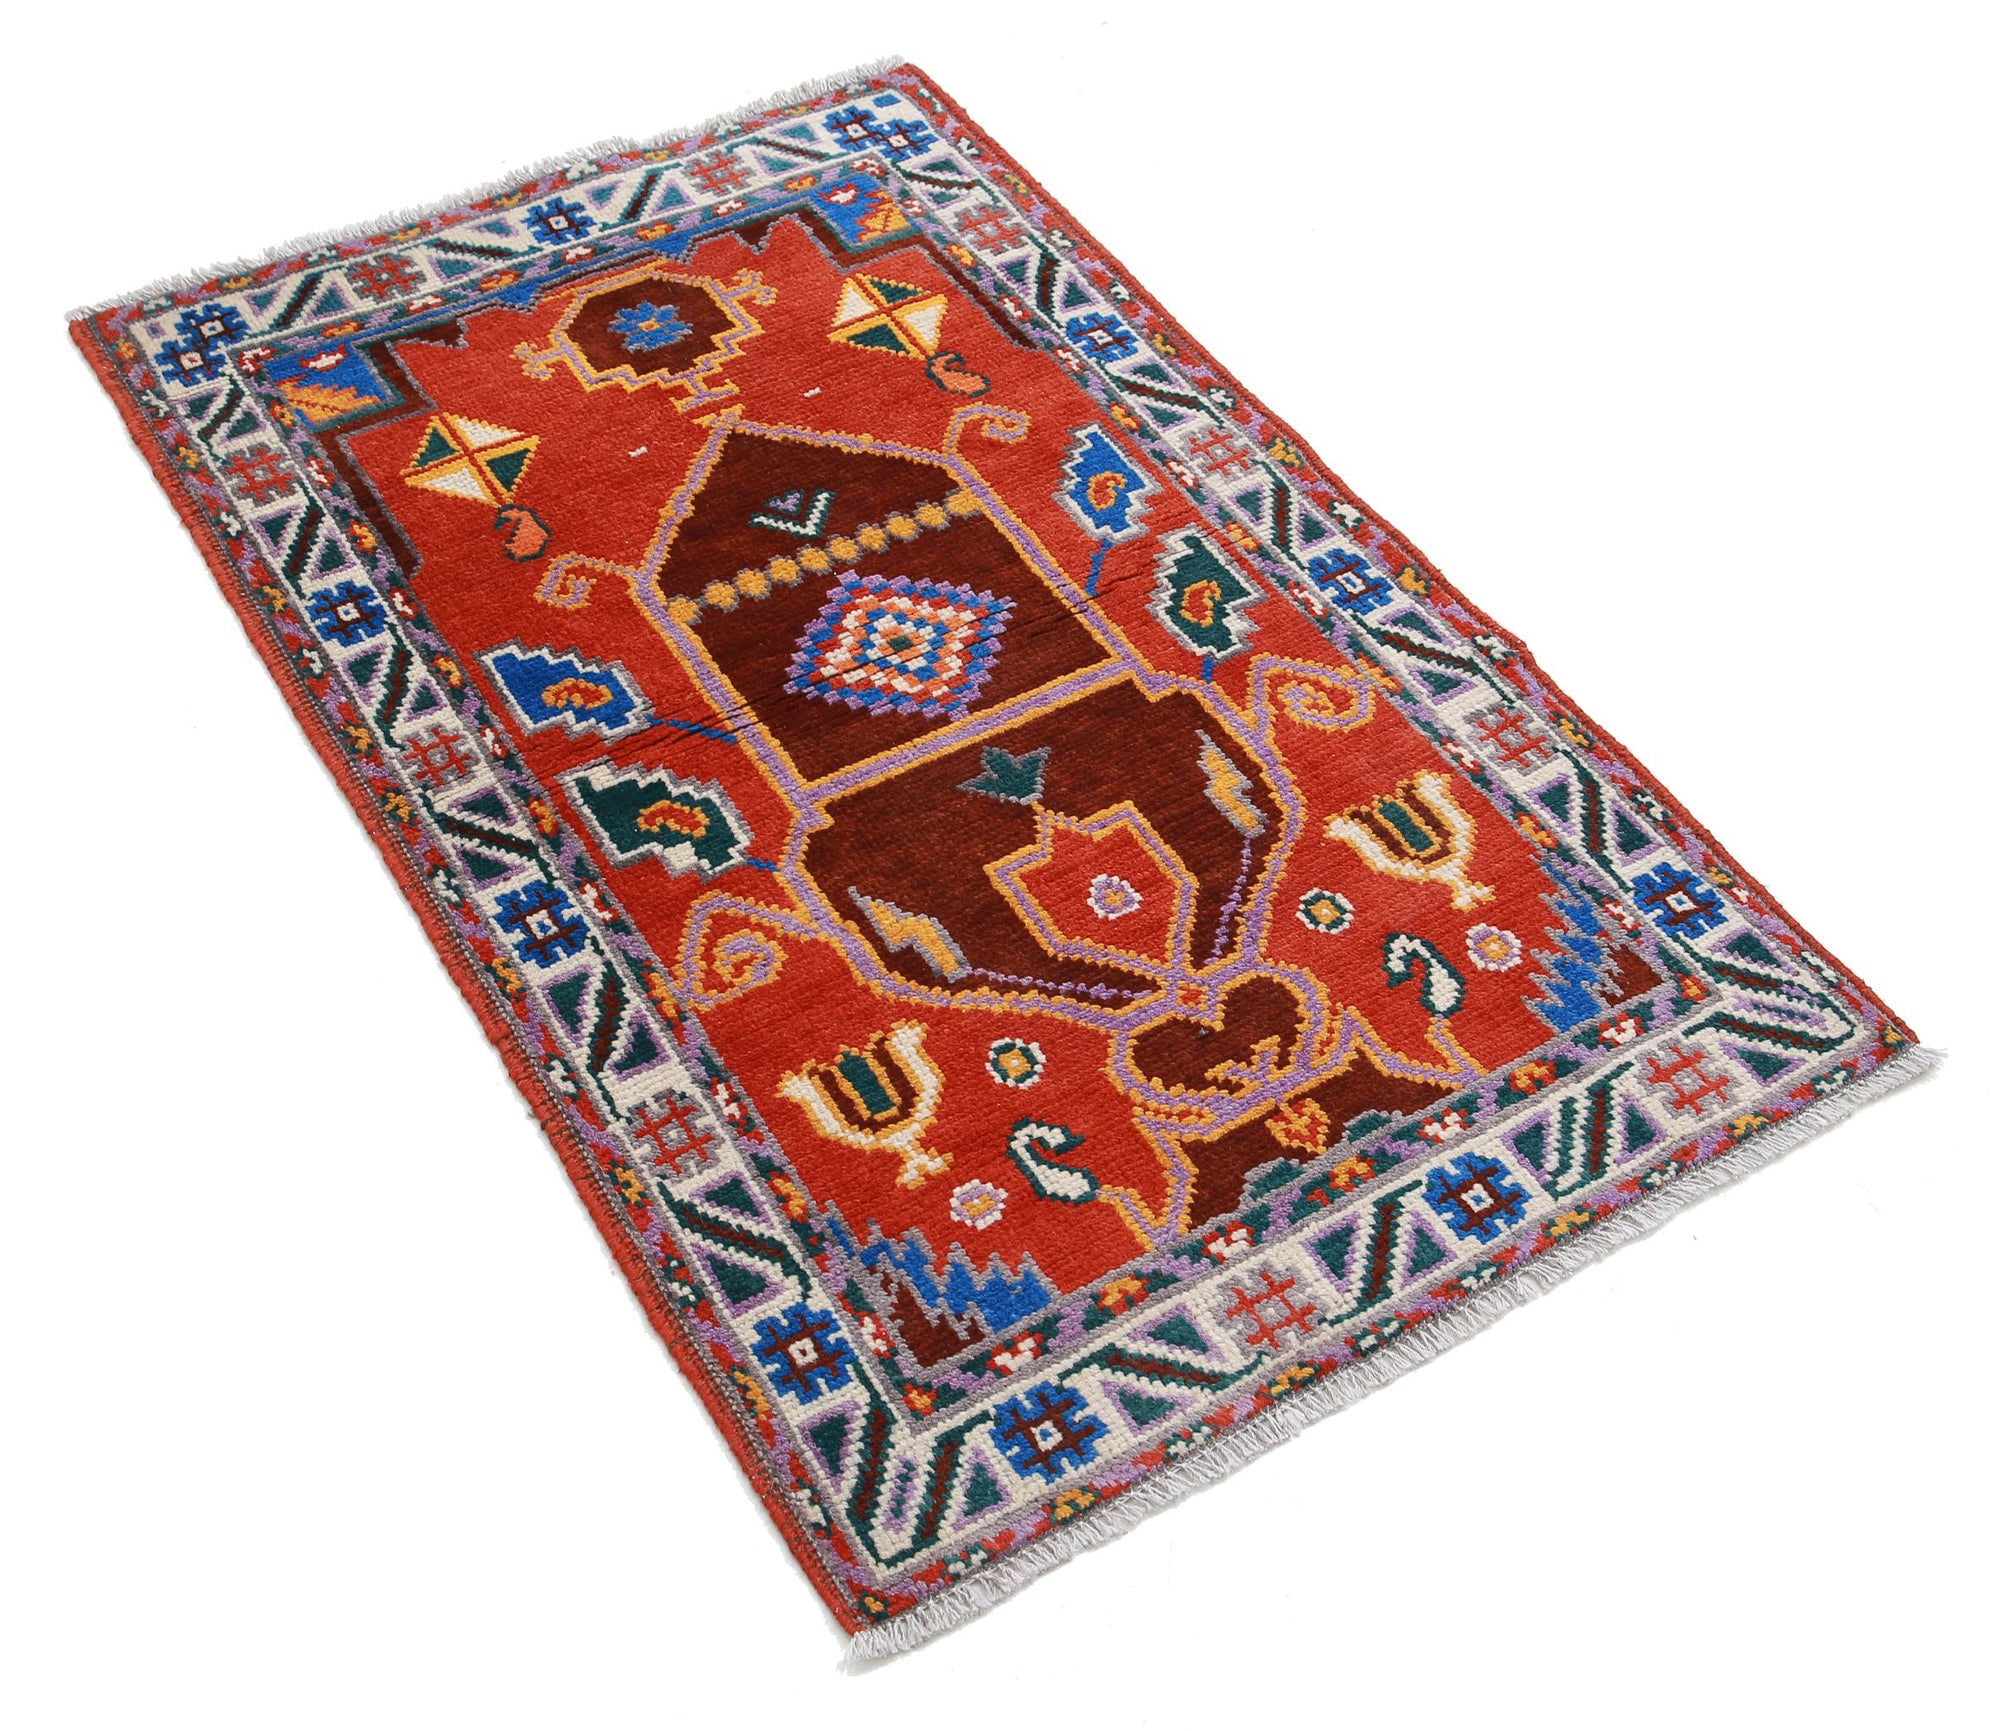 Revival-hand-knotted-qarghani-wool-rug-5014195-1.jpg